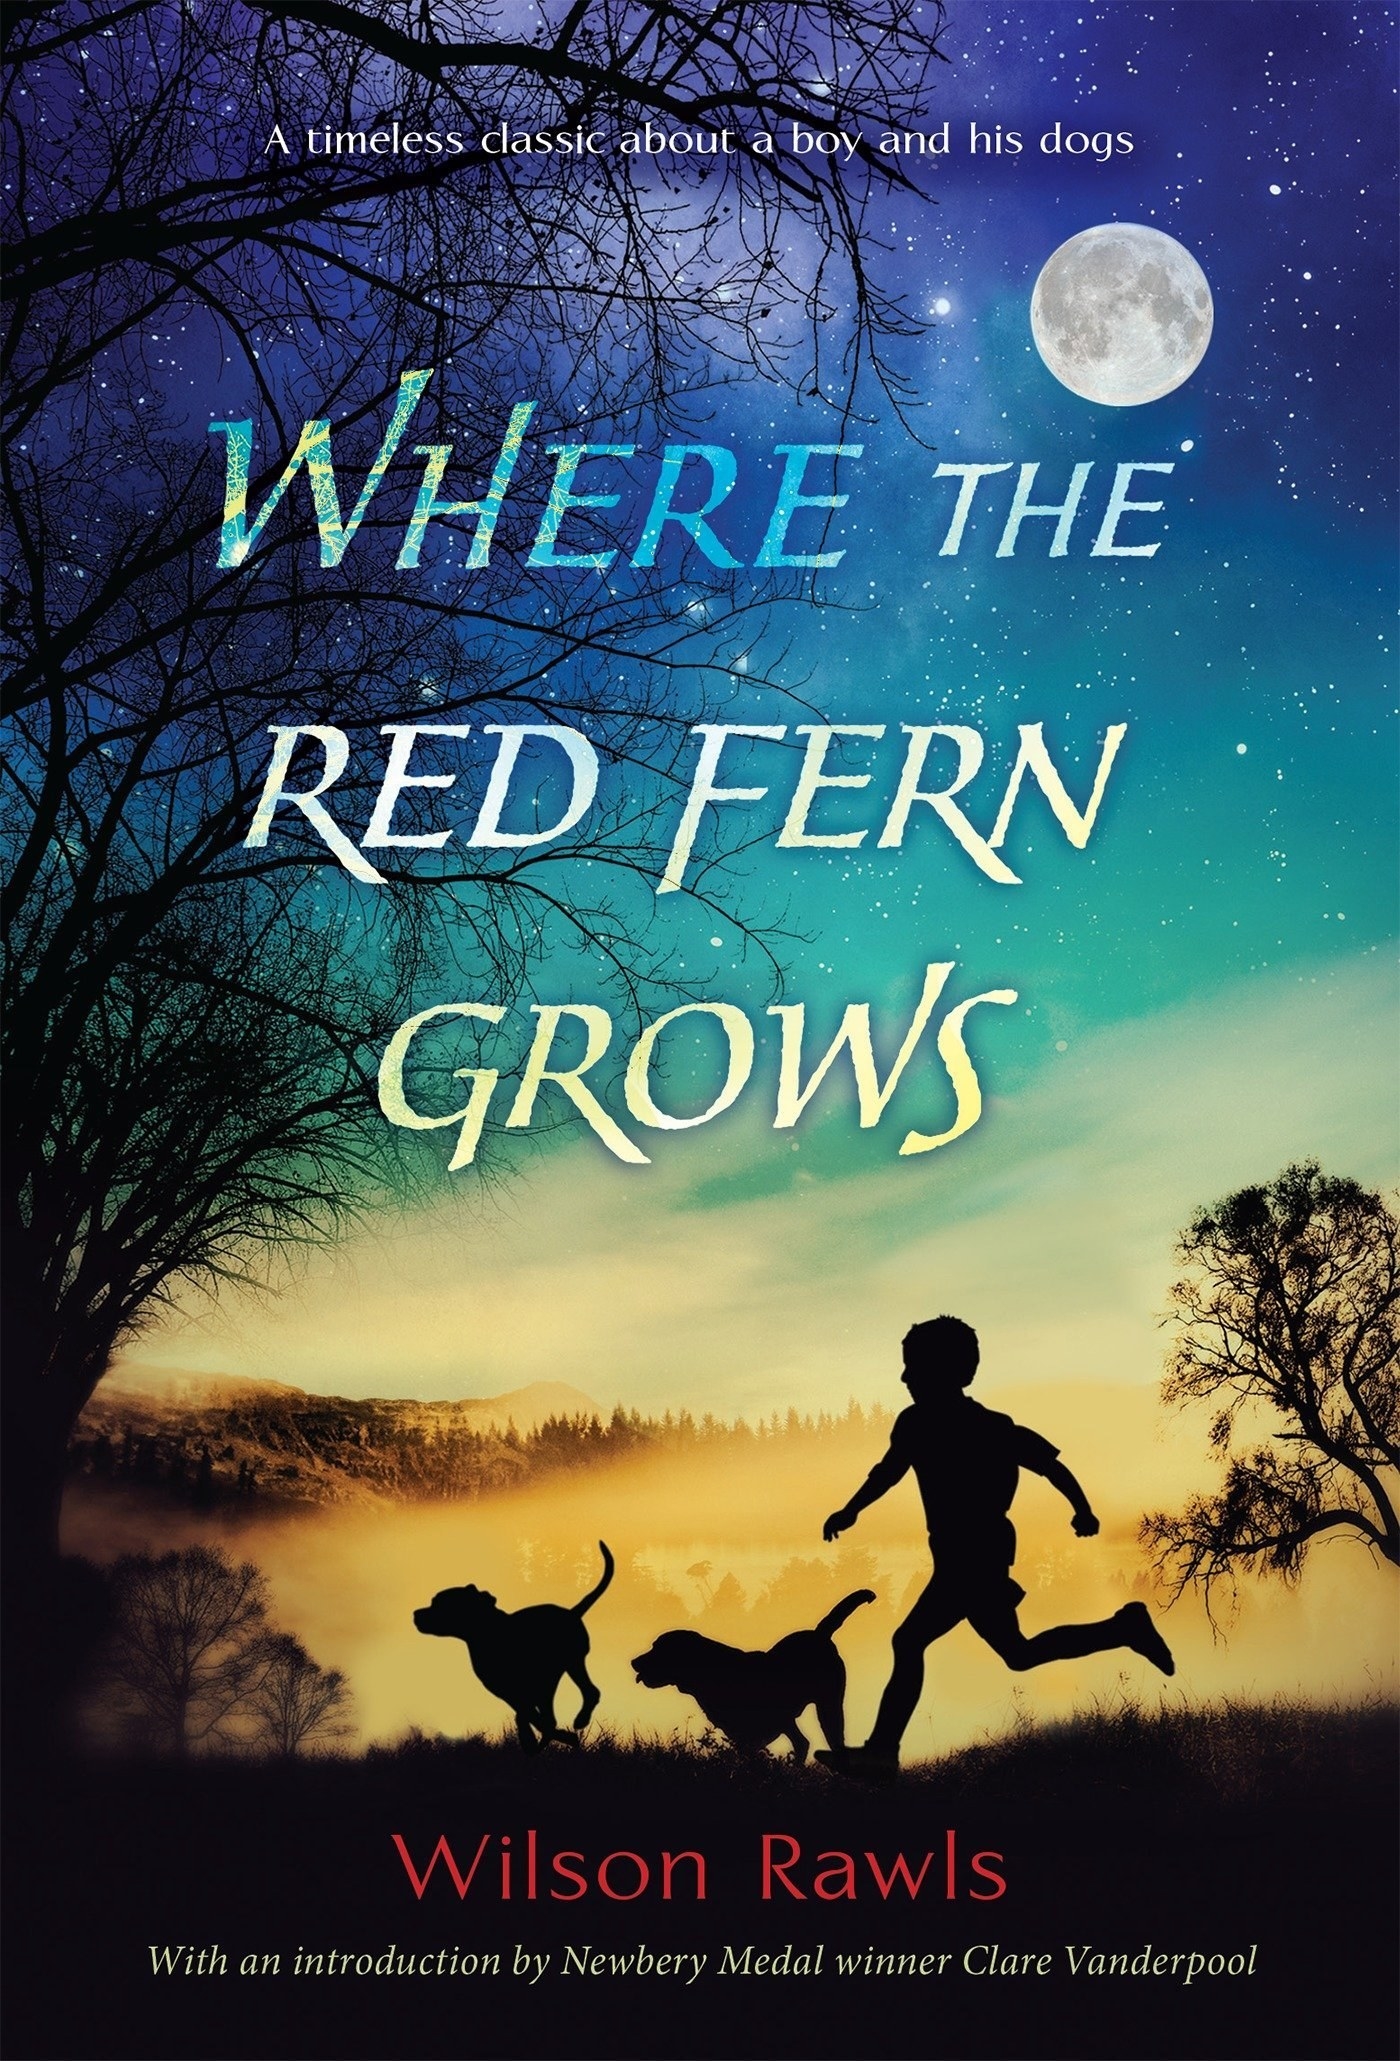 The cover of &quot;Where The Red Fern Grows&quot; by Wilson Rawls